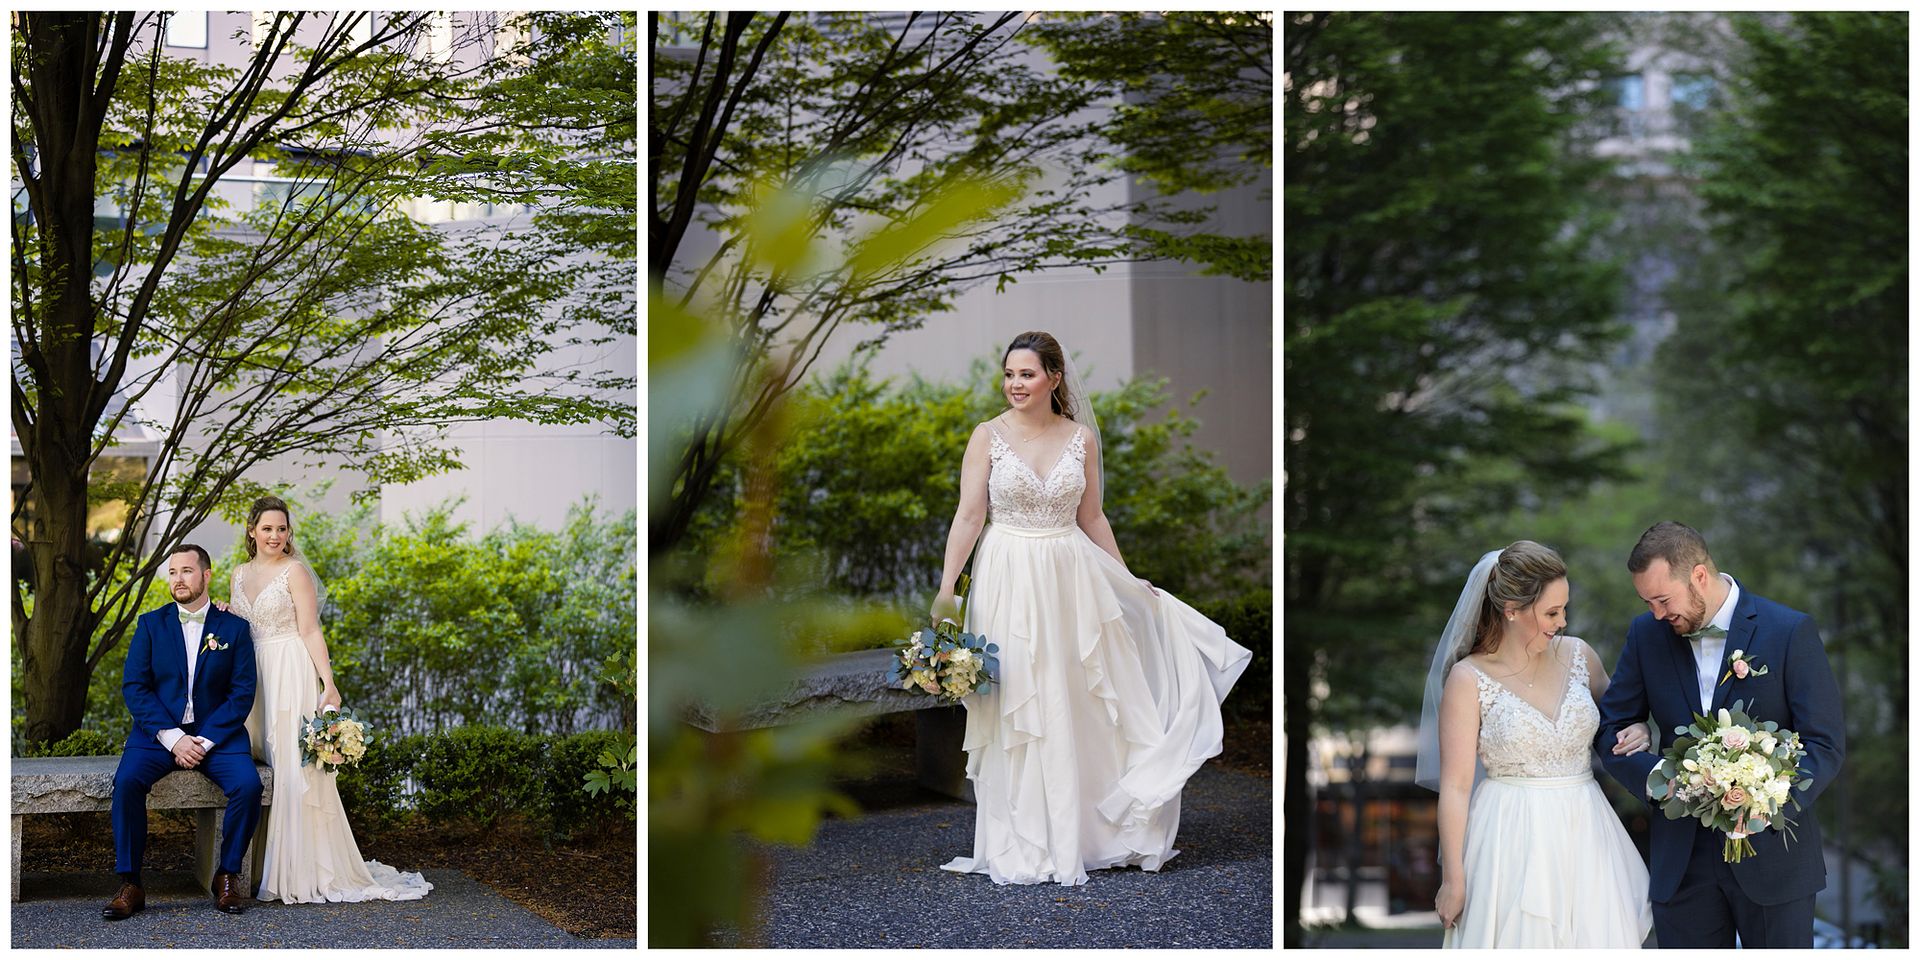 Katelyn and Kevin - Ceremony and Reception at DoubleTree by Hilton Hotel & Suites Pittsburgh Downtown